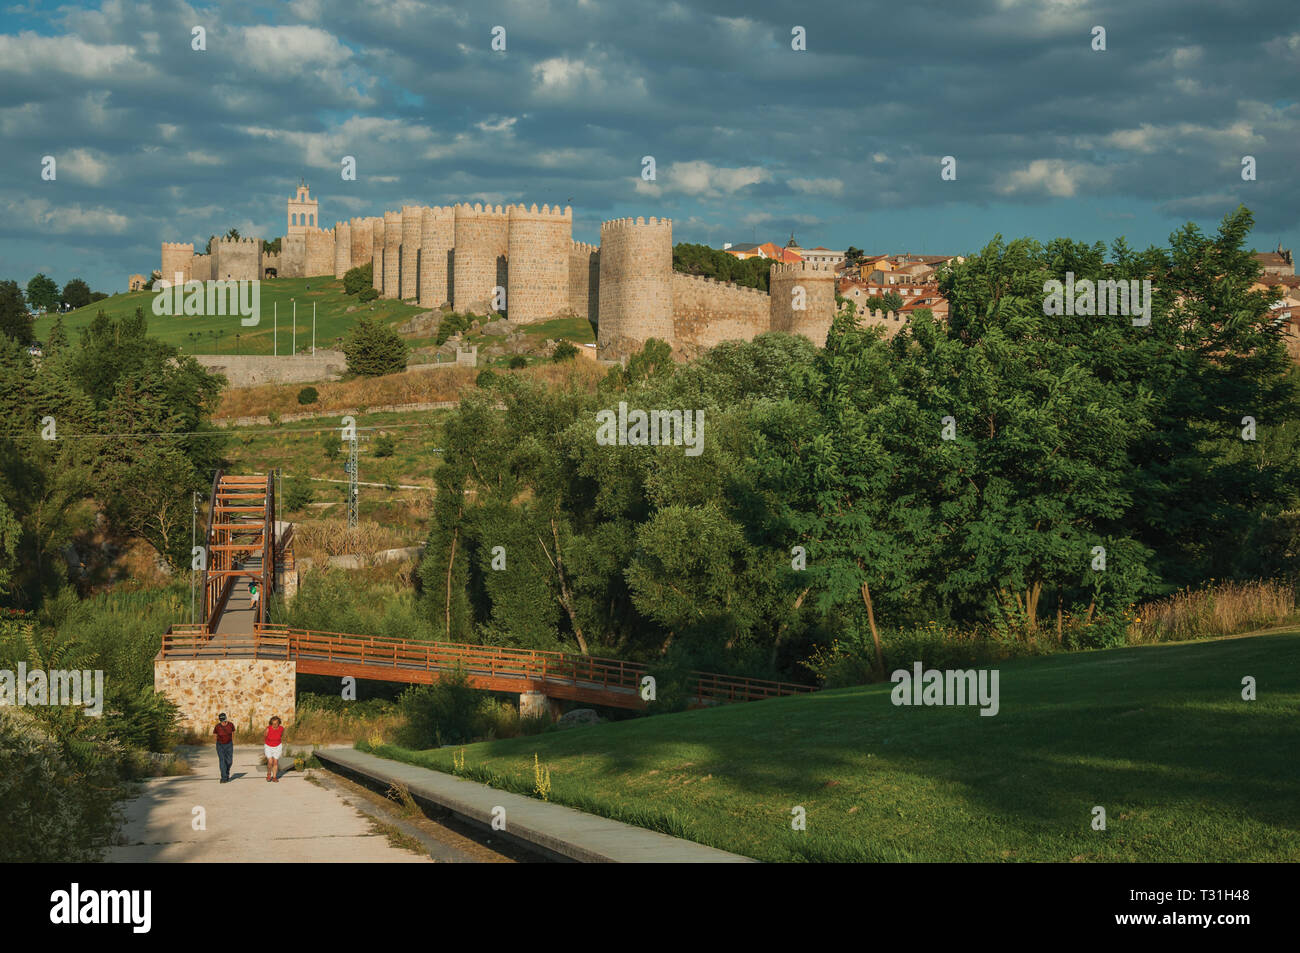 People on wooden bridge over the Adaja River and wall around Avila on top of hill. With an imposing wall around the gothic city center in Spain. Stock Photo